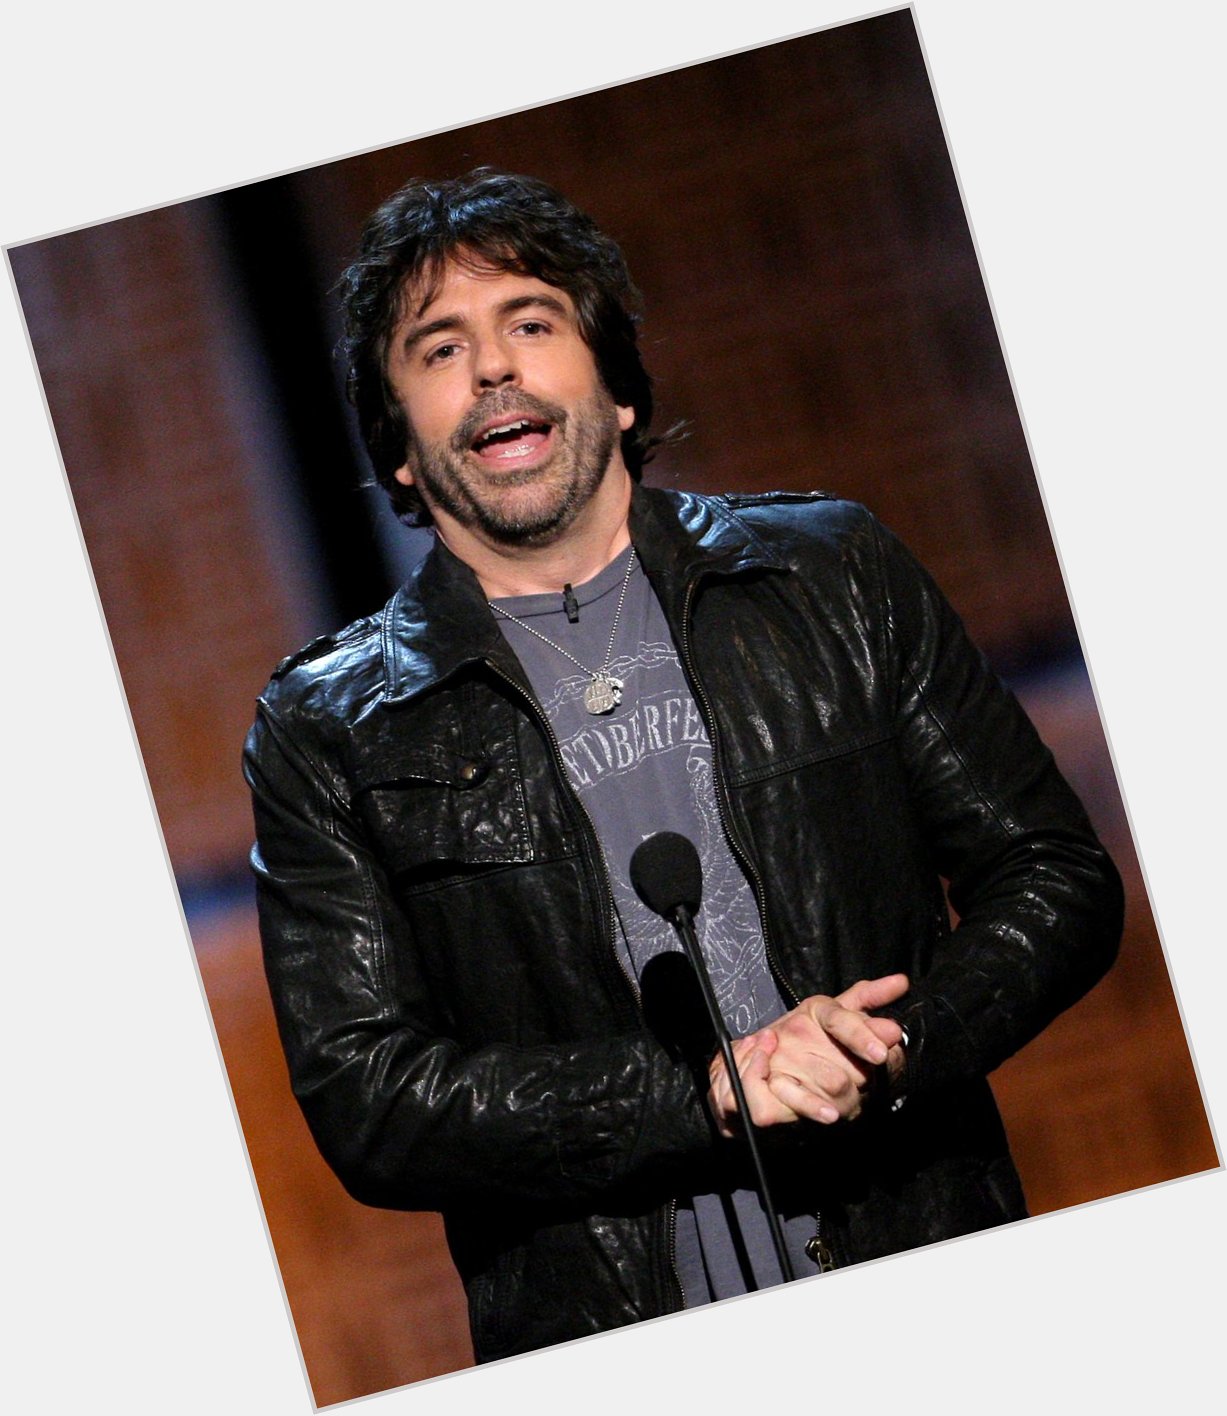 Happy Birthday to Greg Giraldo, who would have turned 49 today! 